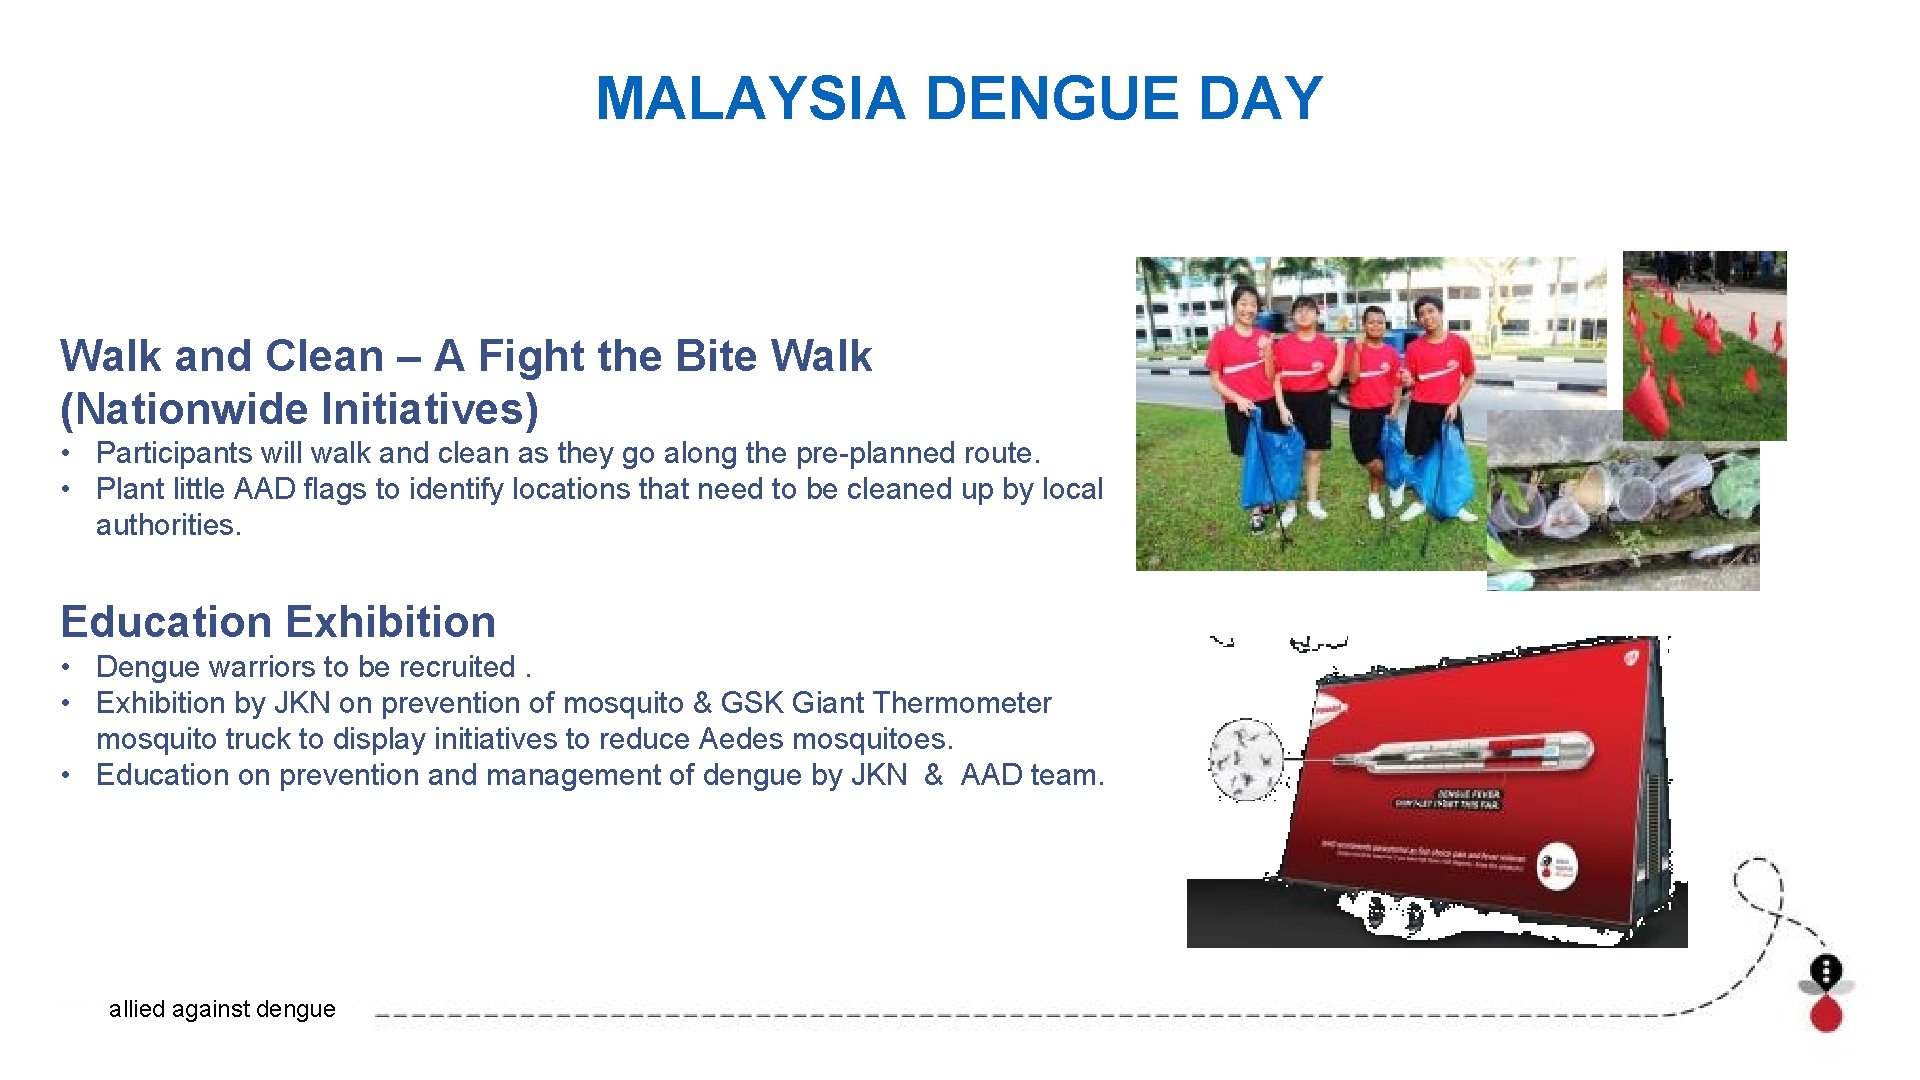 MALAYSIA DENGUE DAY Walk and Clean – A Fight the Bite Walk (Nationwide Initiatives)